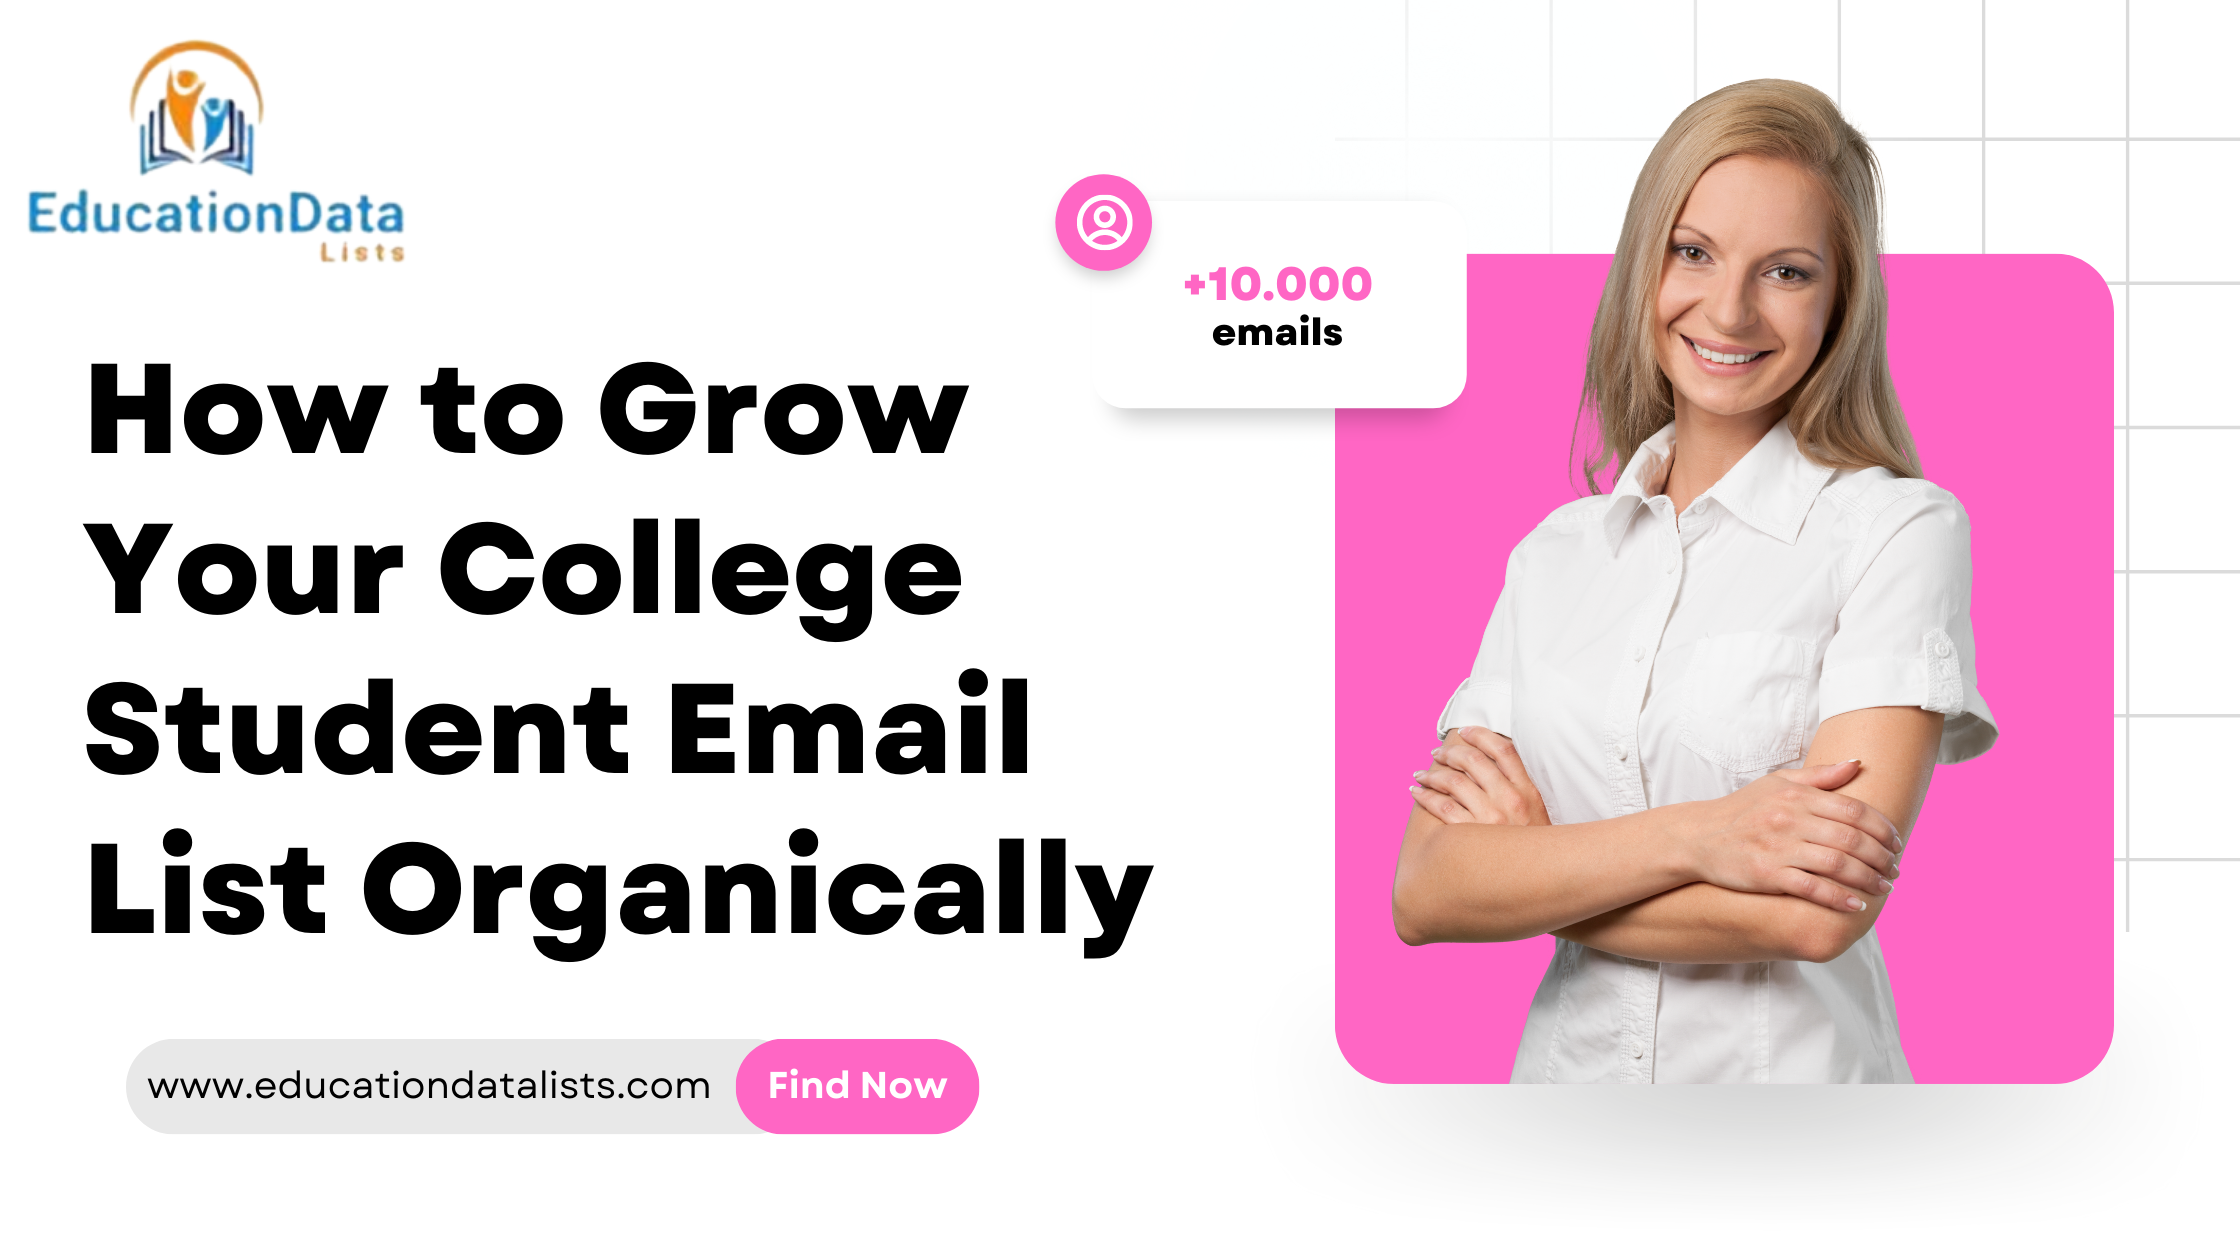 How to Grow Your College Student Email List Organically